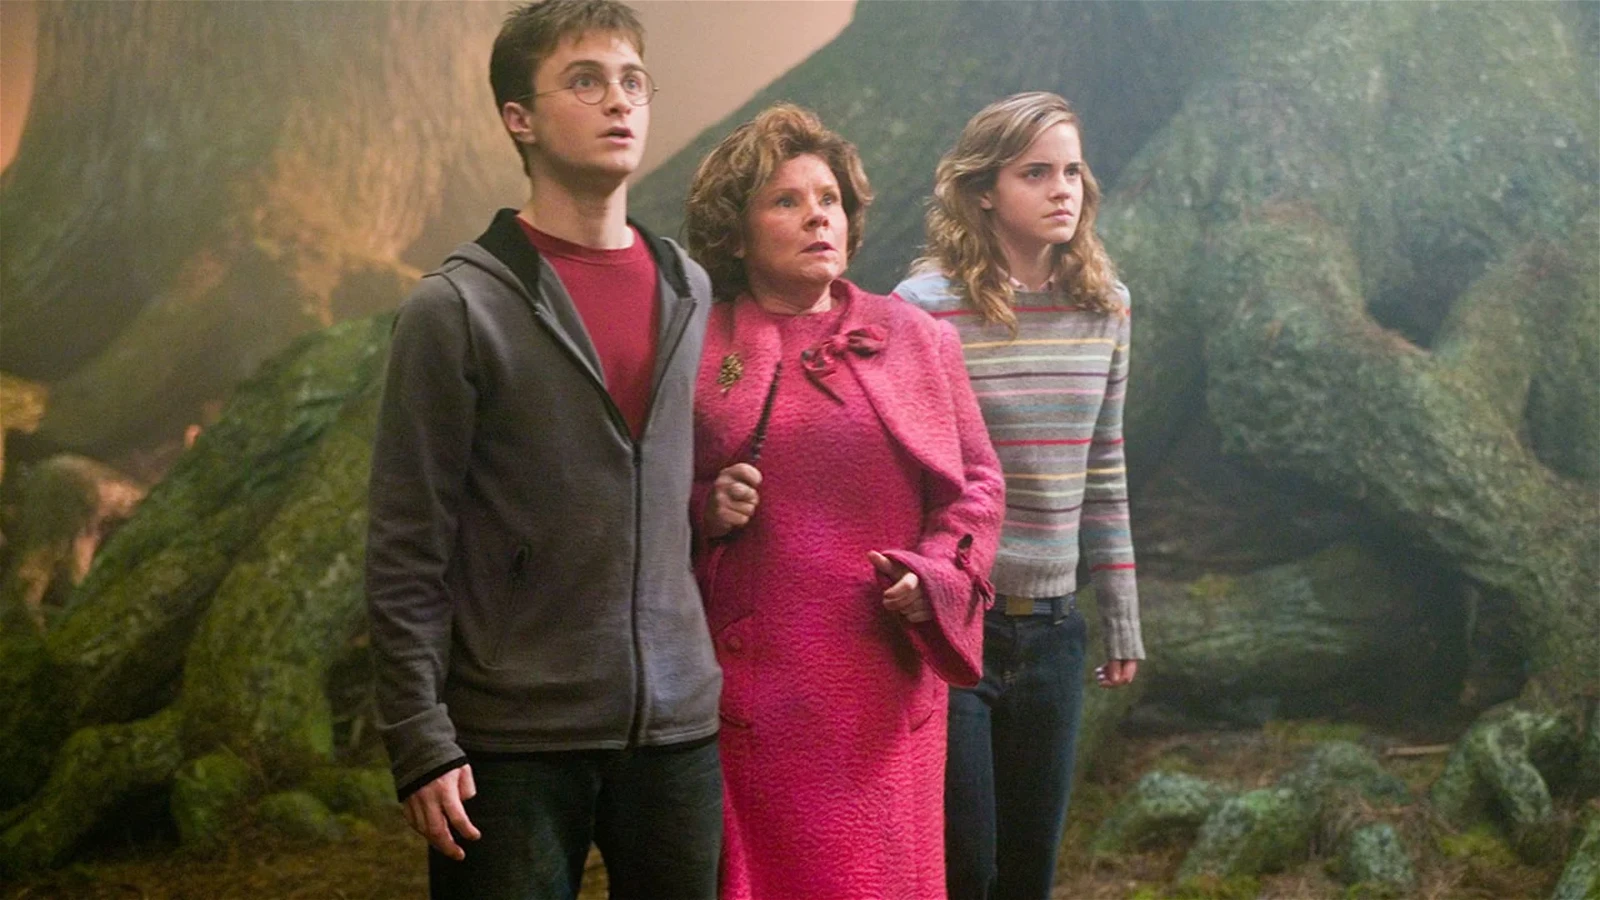 Imelda Staunton with Daniel Radcliffe and Emma Watson in Harry Potter and the Order of the Phoenix